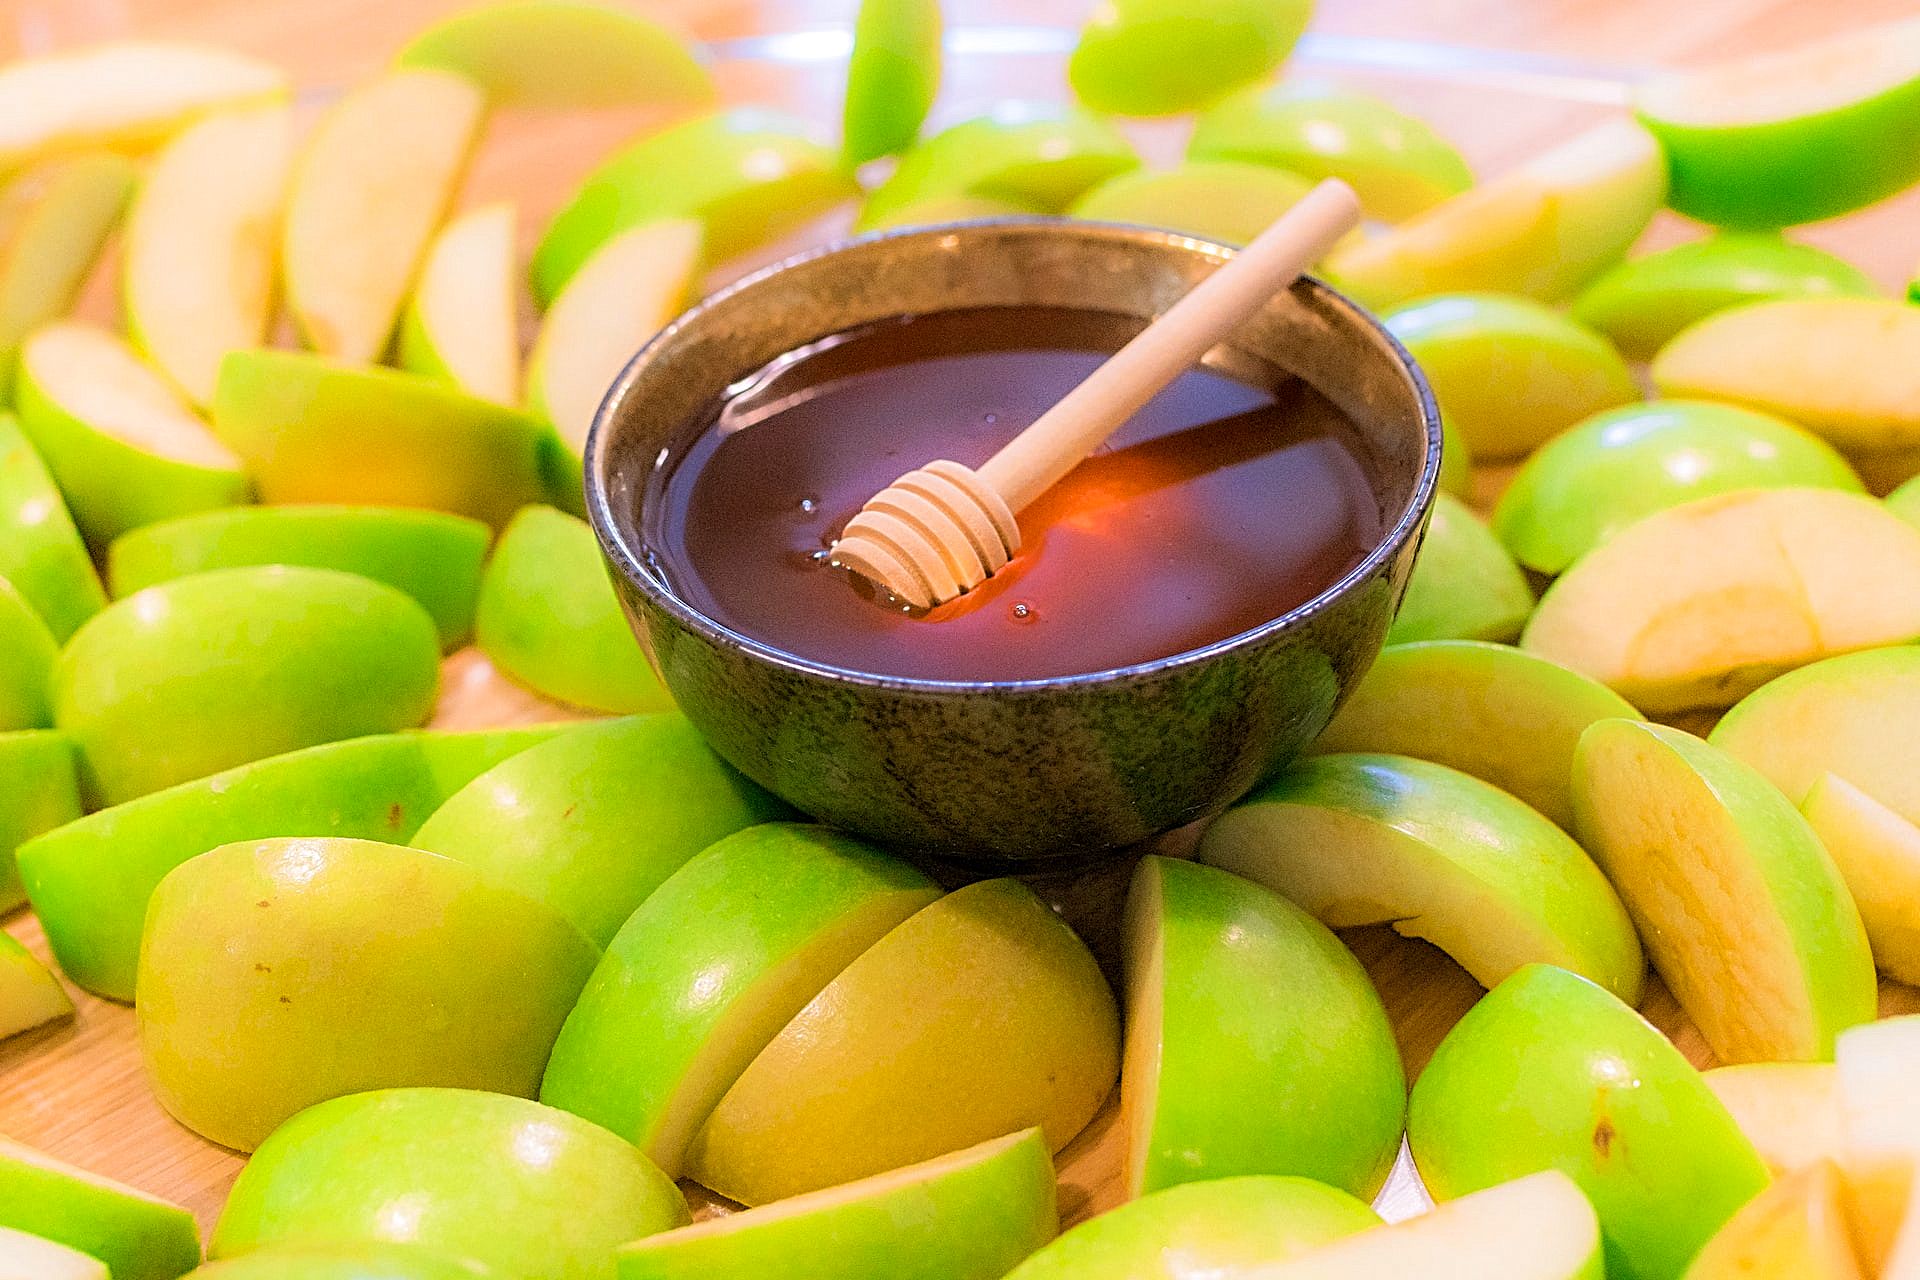 Rosh Hashanah honey bowl with a wooden honey dipper and apples